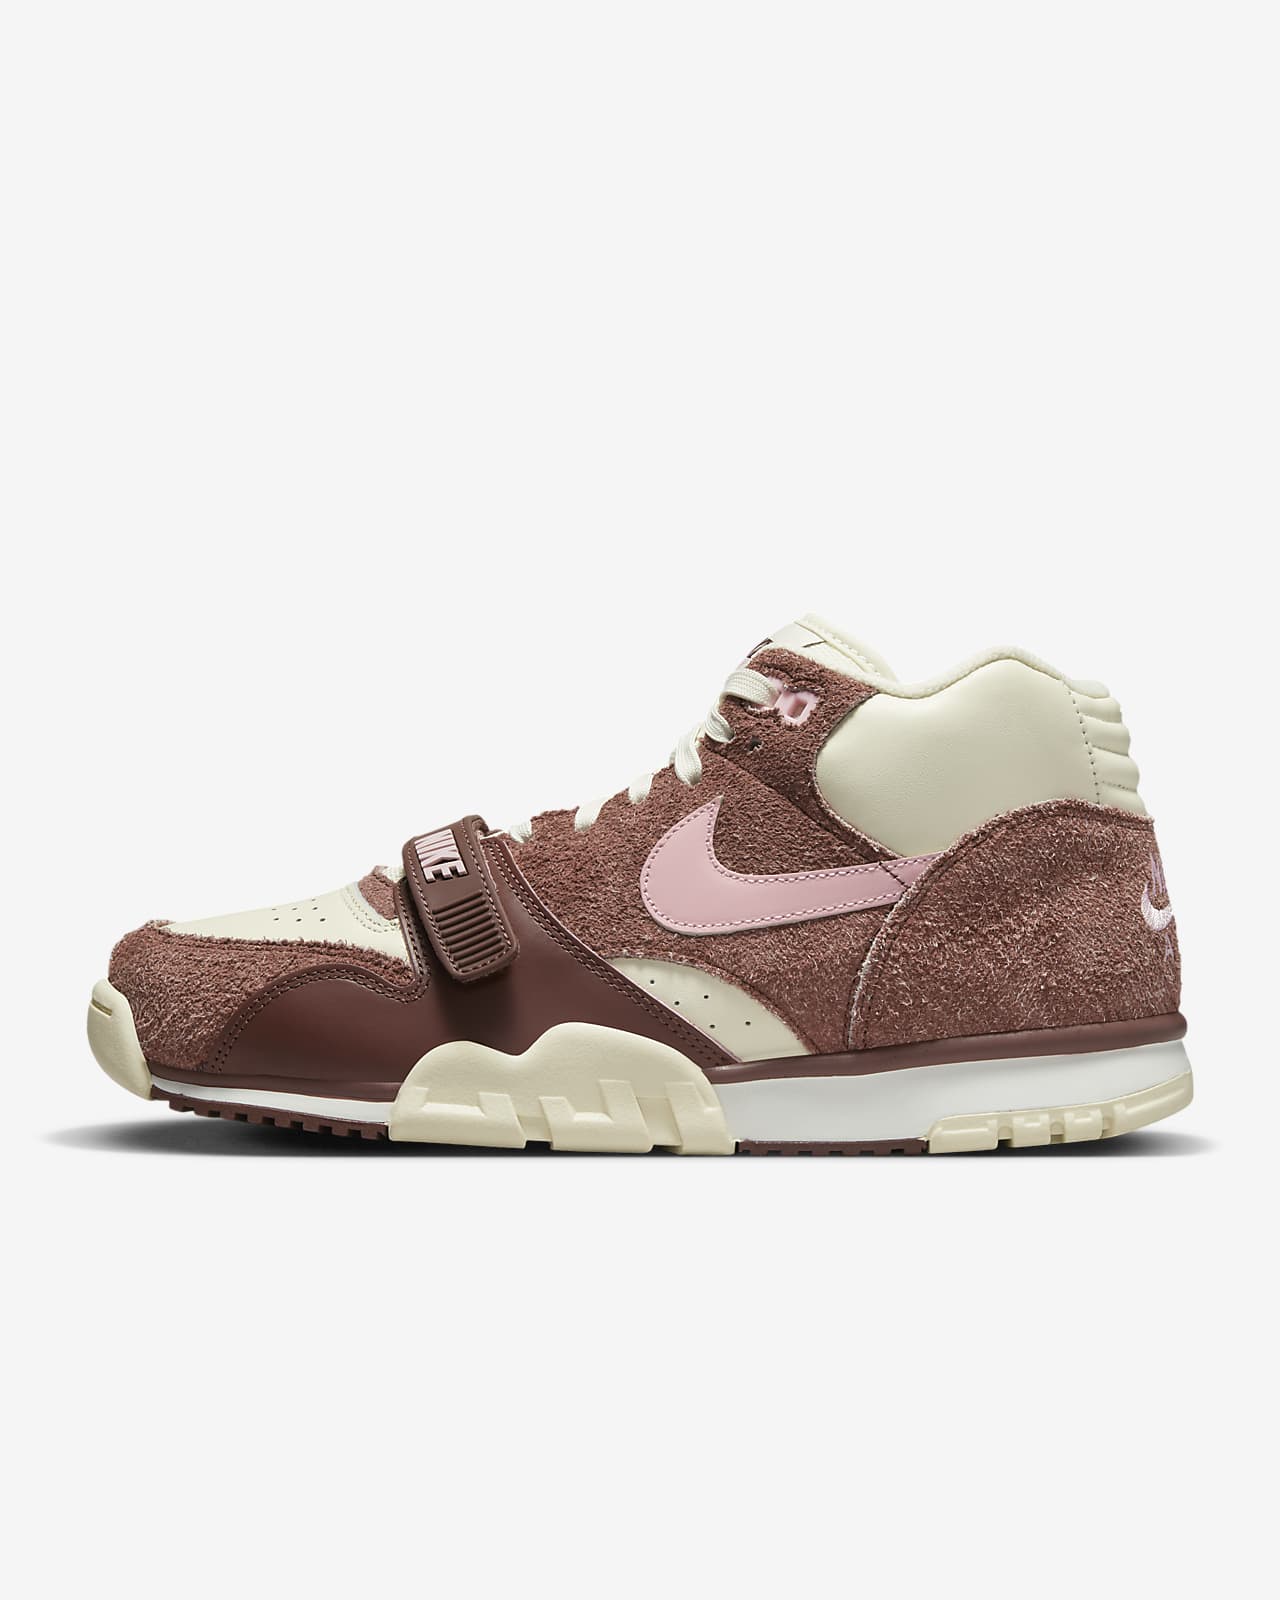 Air Trainer Men's Shoes. Nike